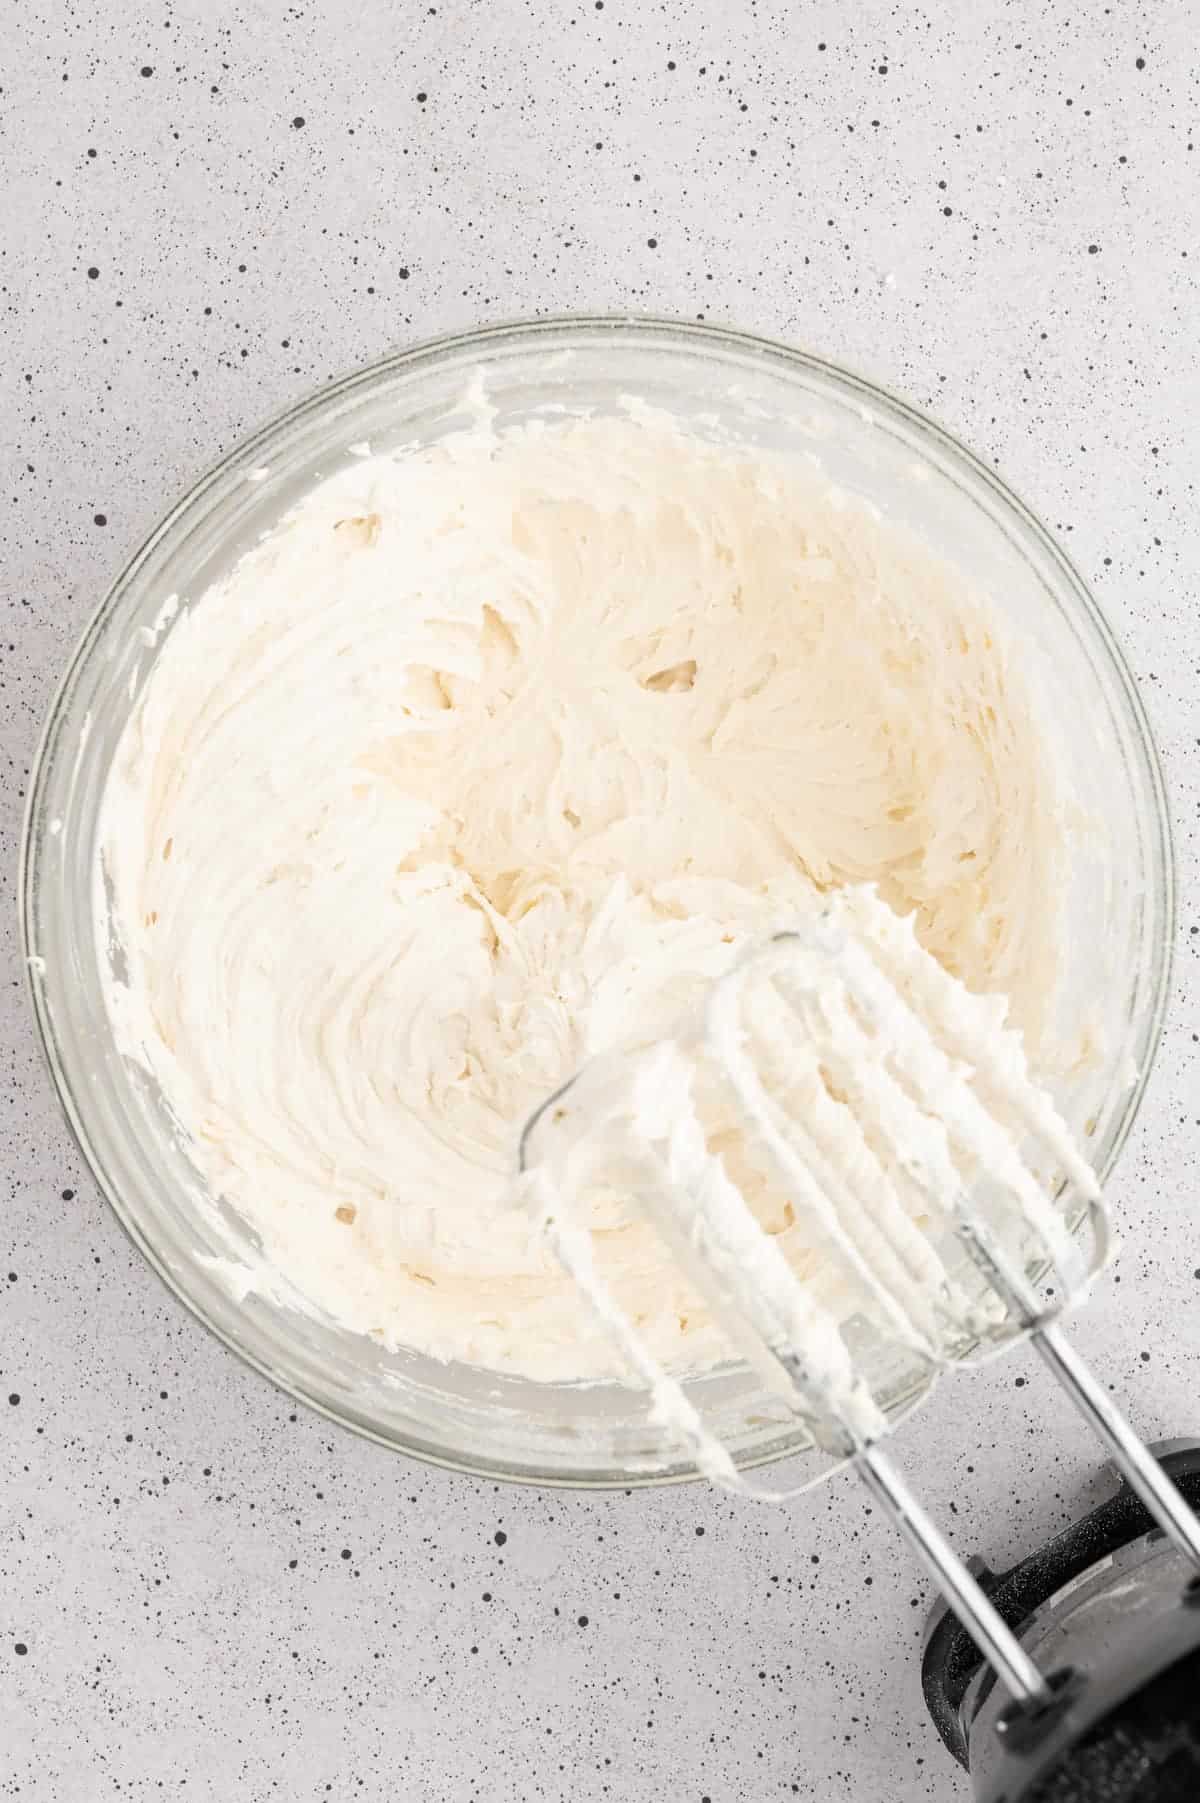 Vegan buttercream frosting in a mixing bowl.